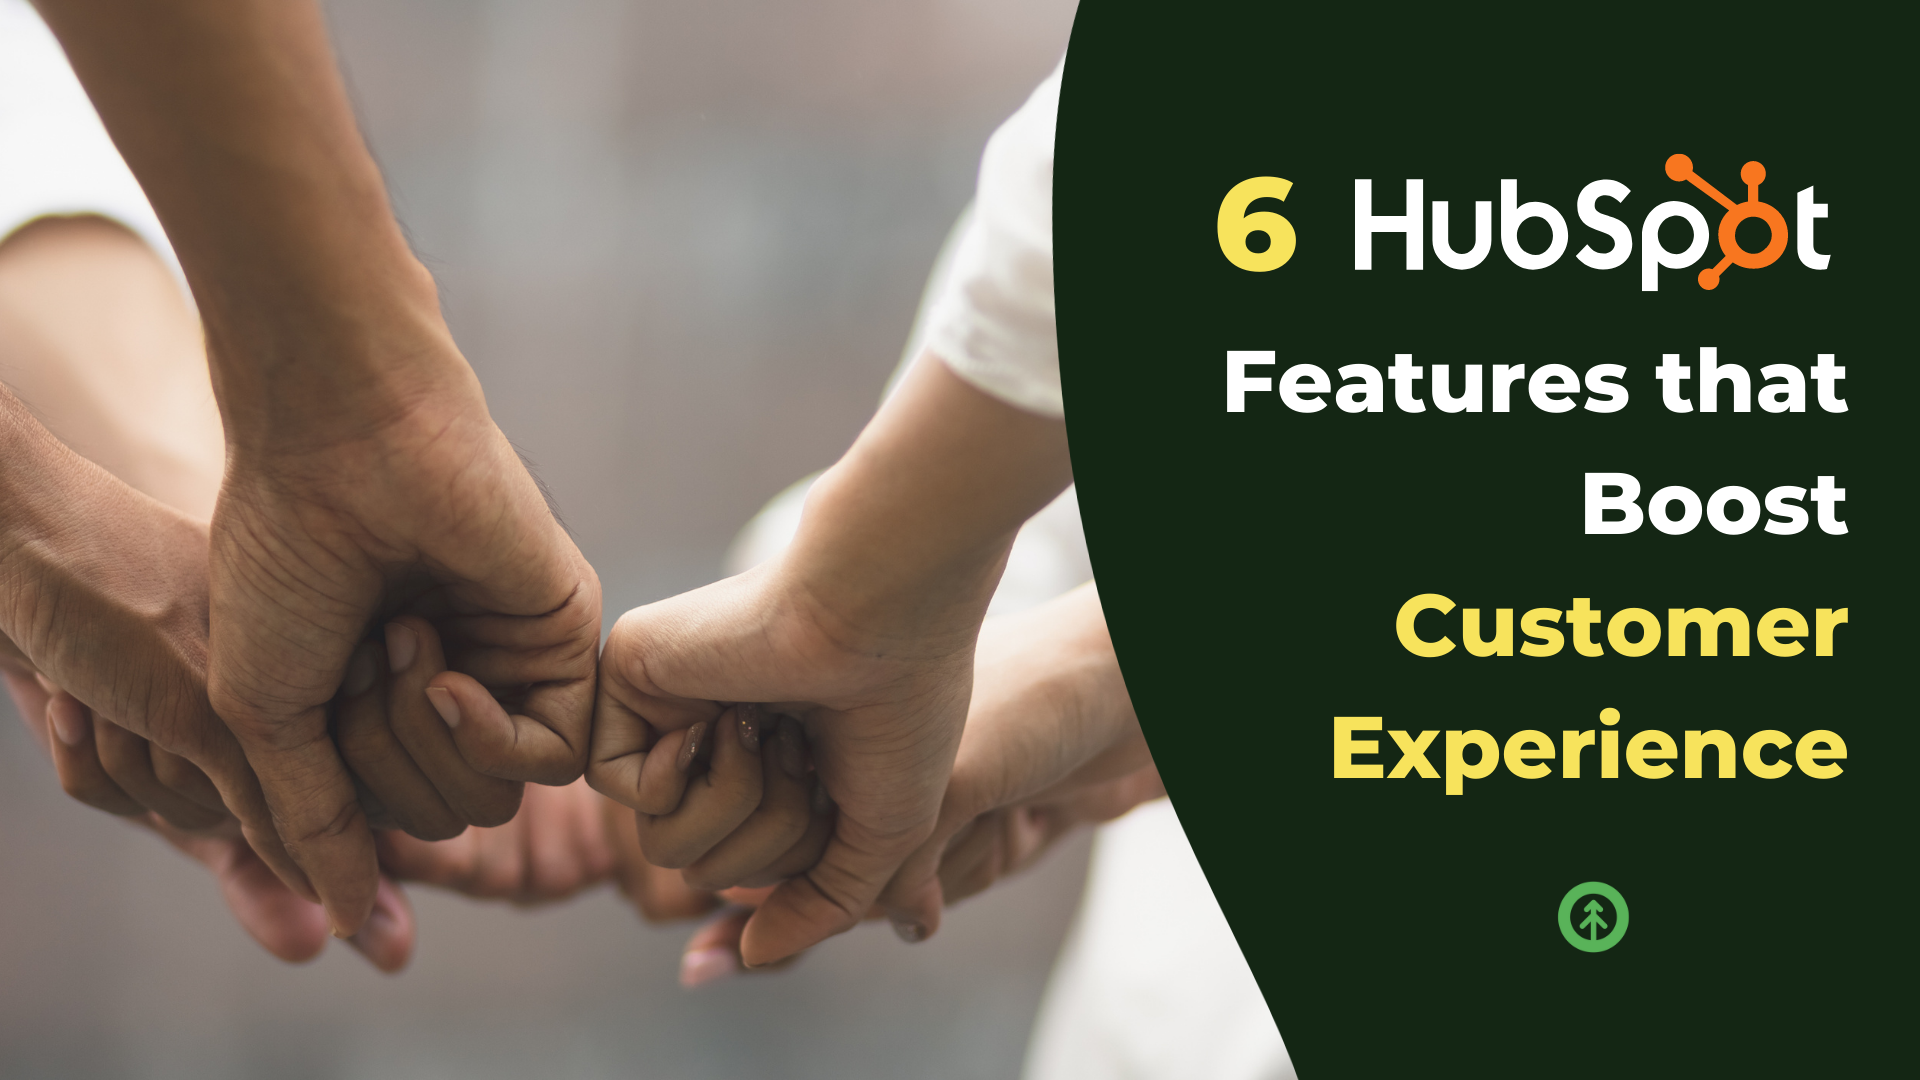 6 HubSpot Features that Boost Customer Experience